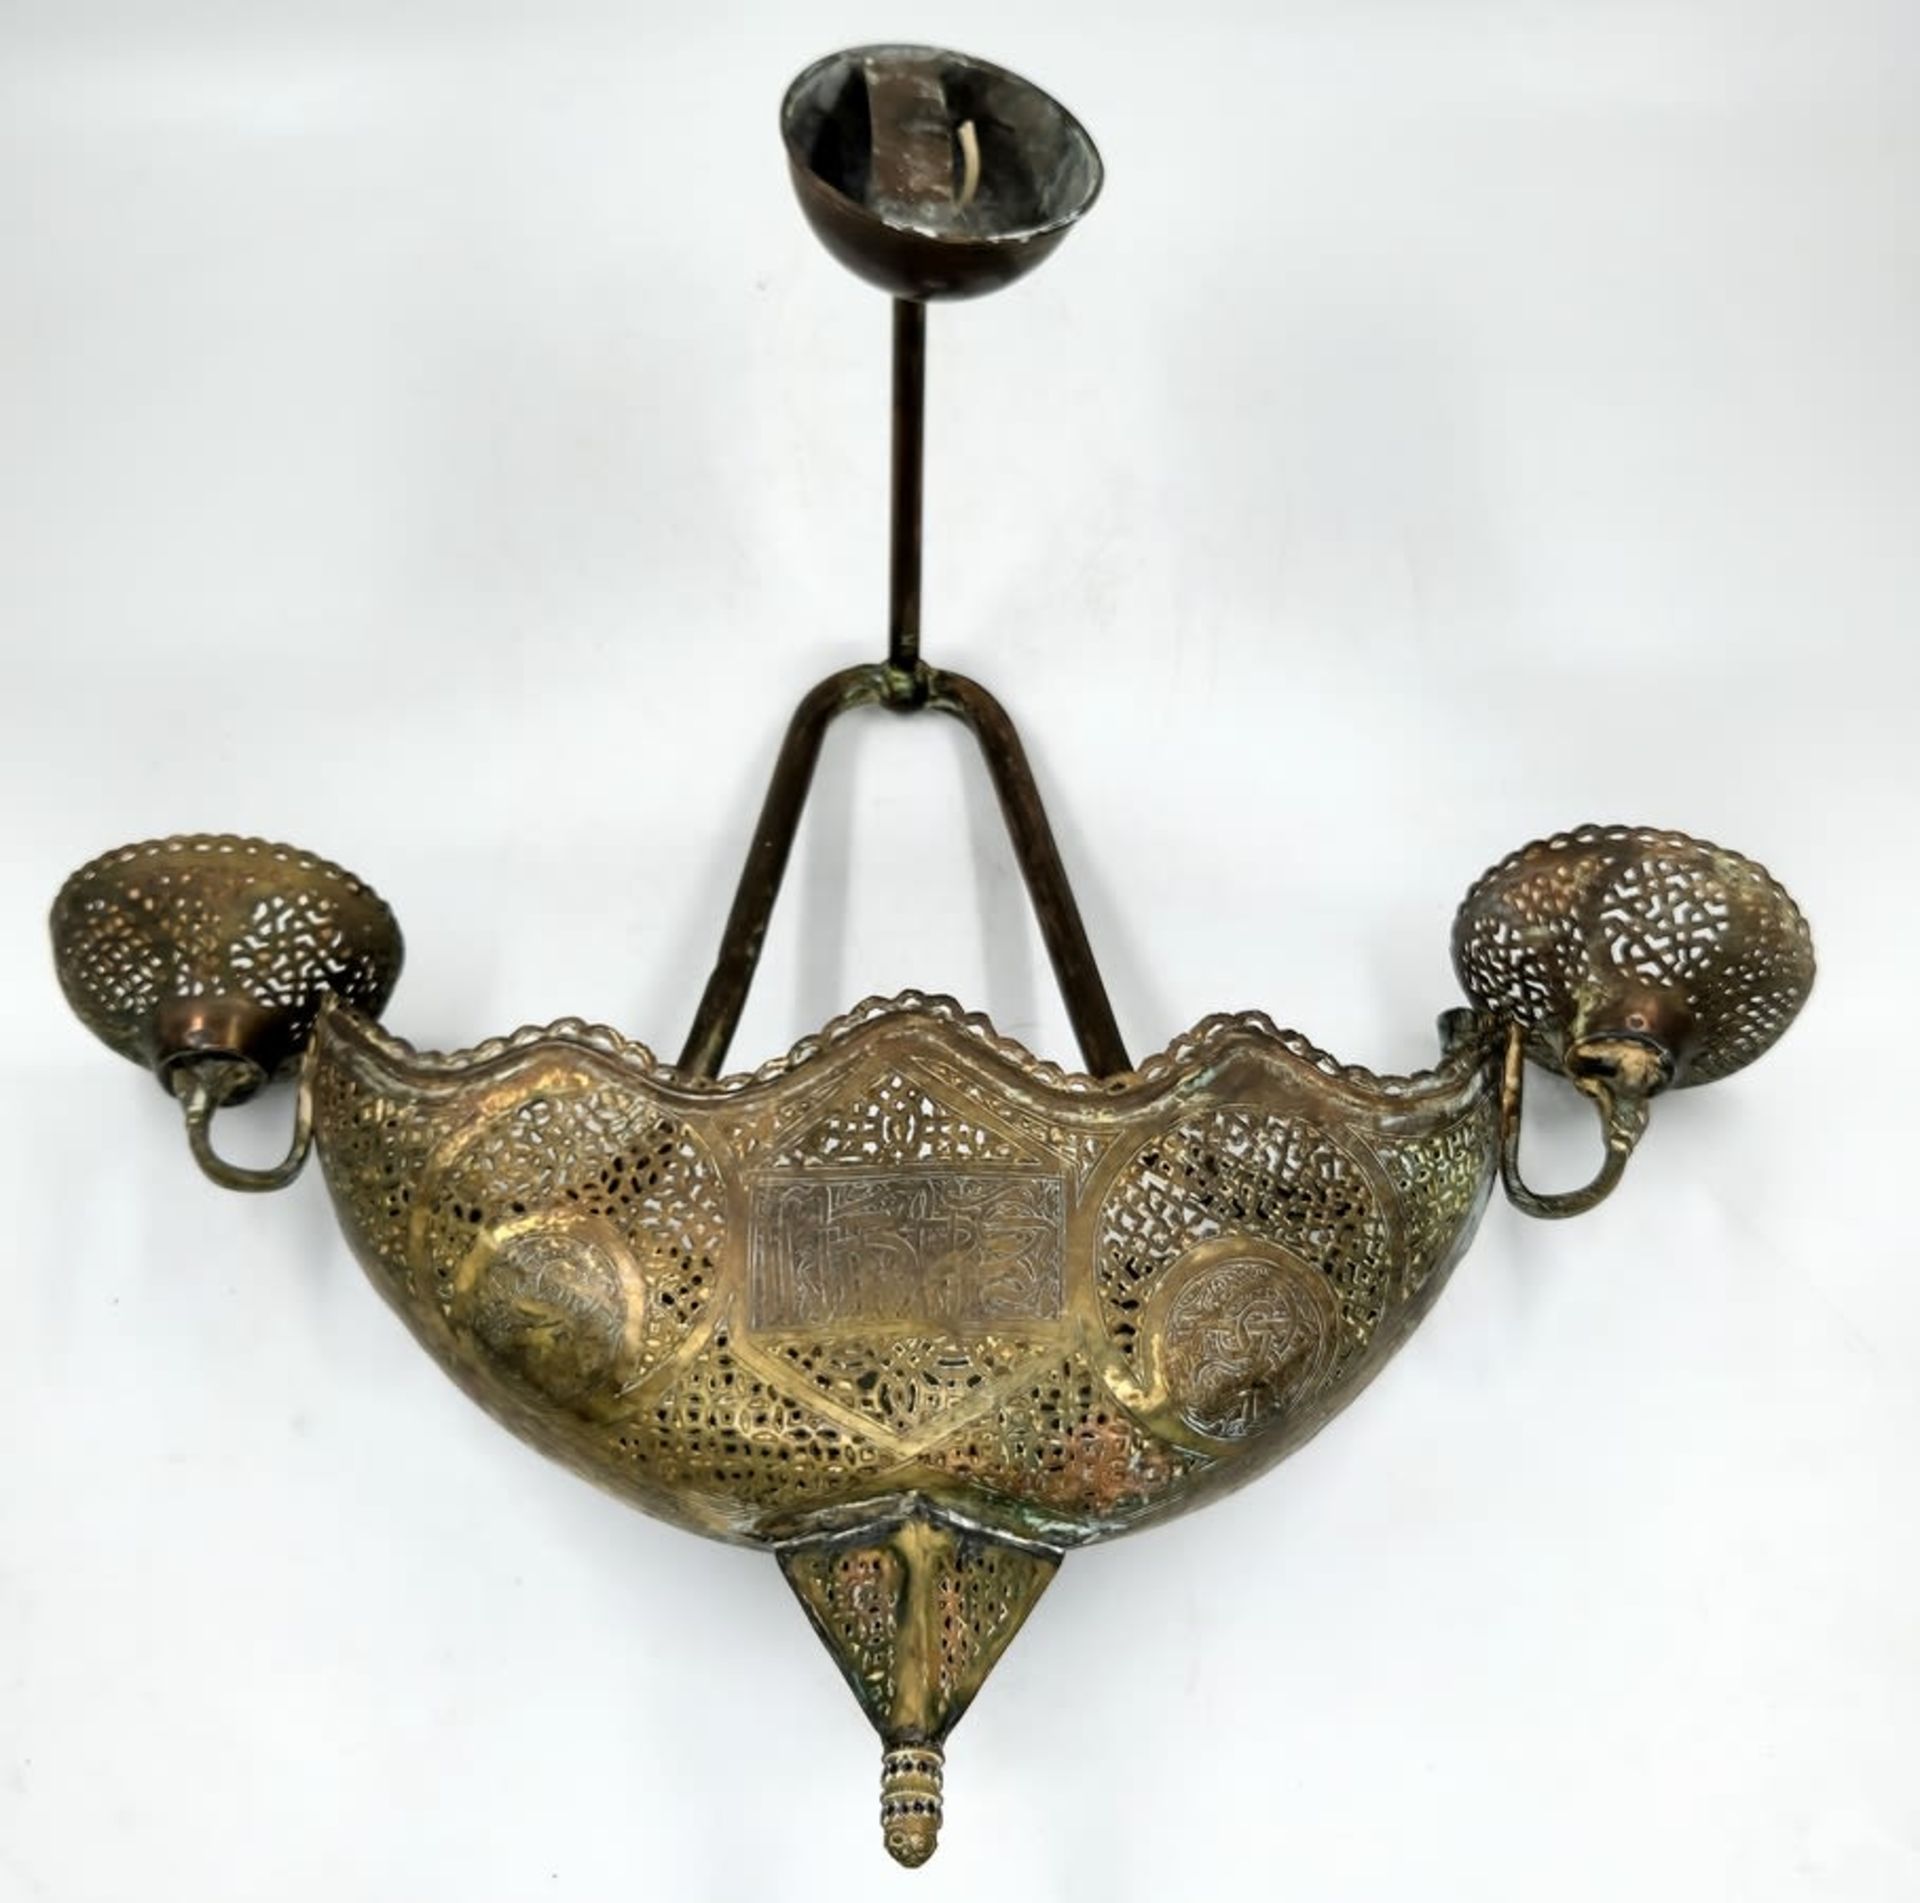 A Syrian side lamp, 19th century, made of sawn and engraved brass, handmade, arabesque decorations - Image 2 of 3